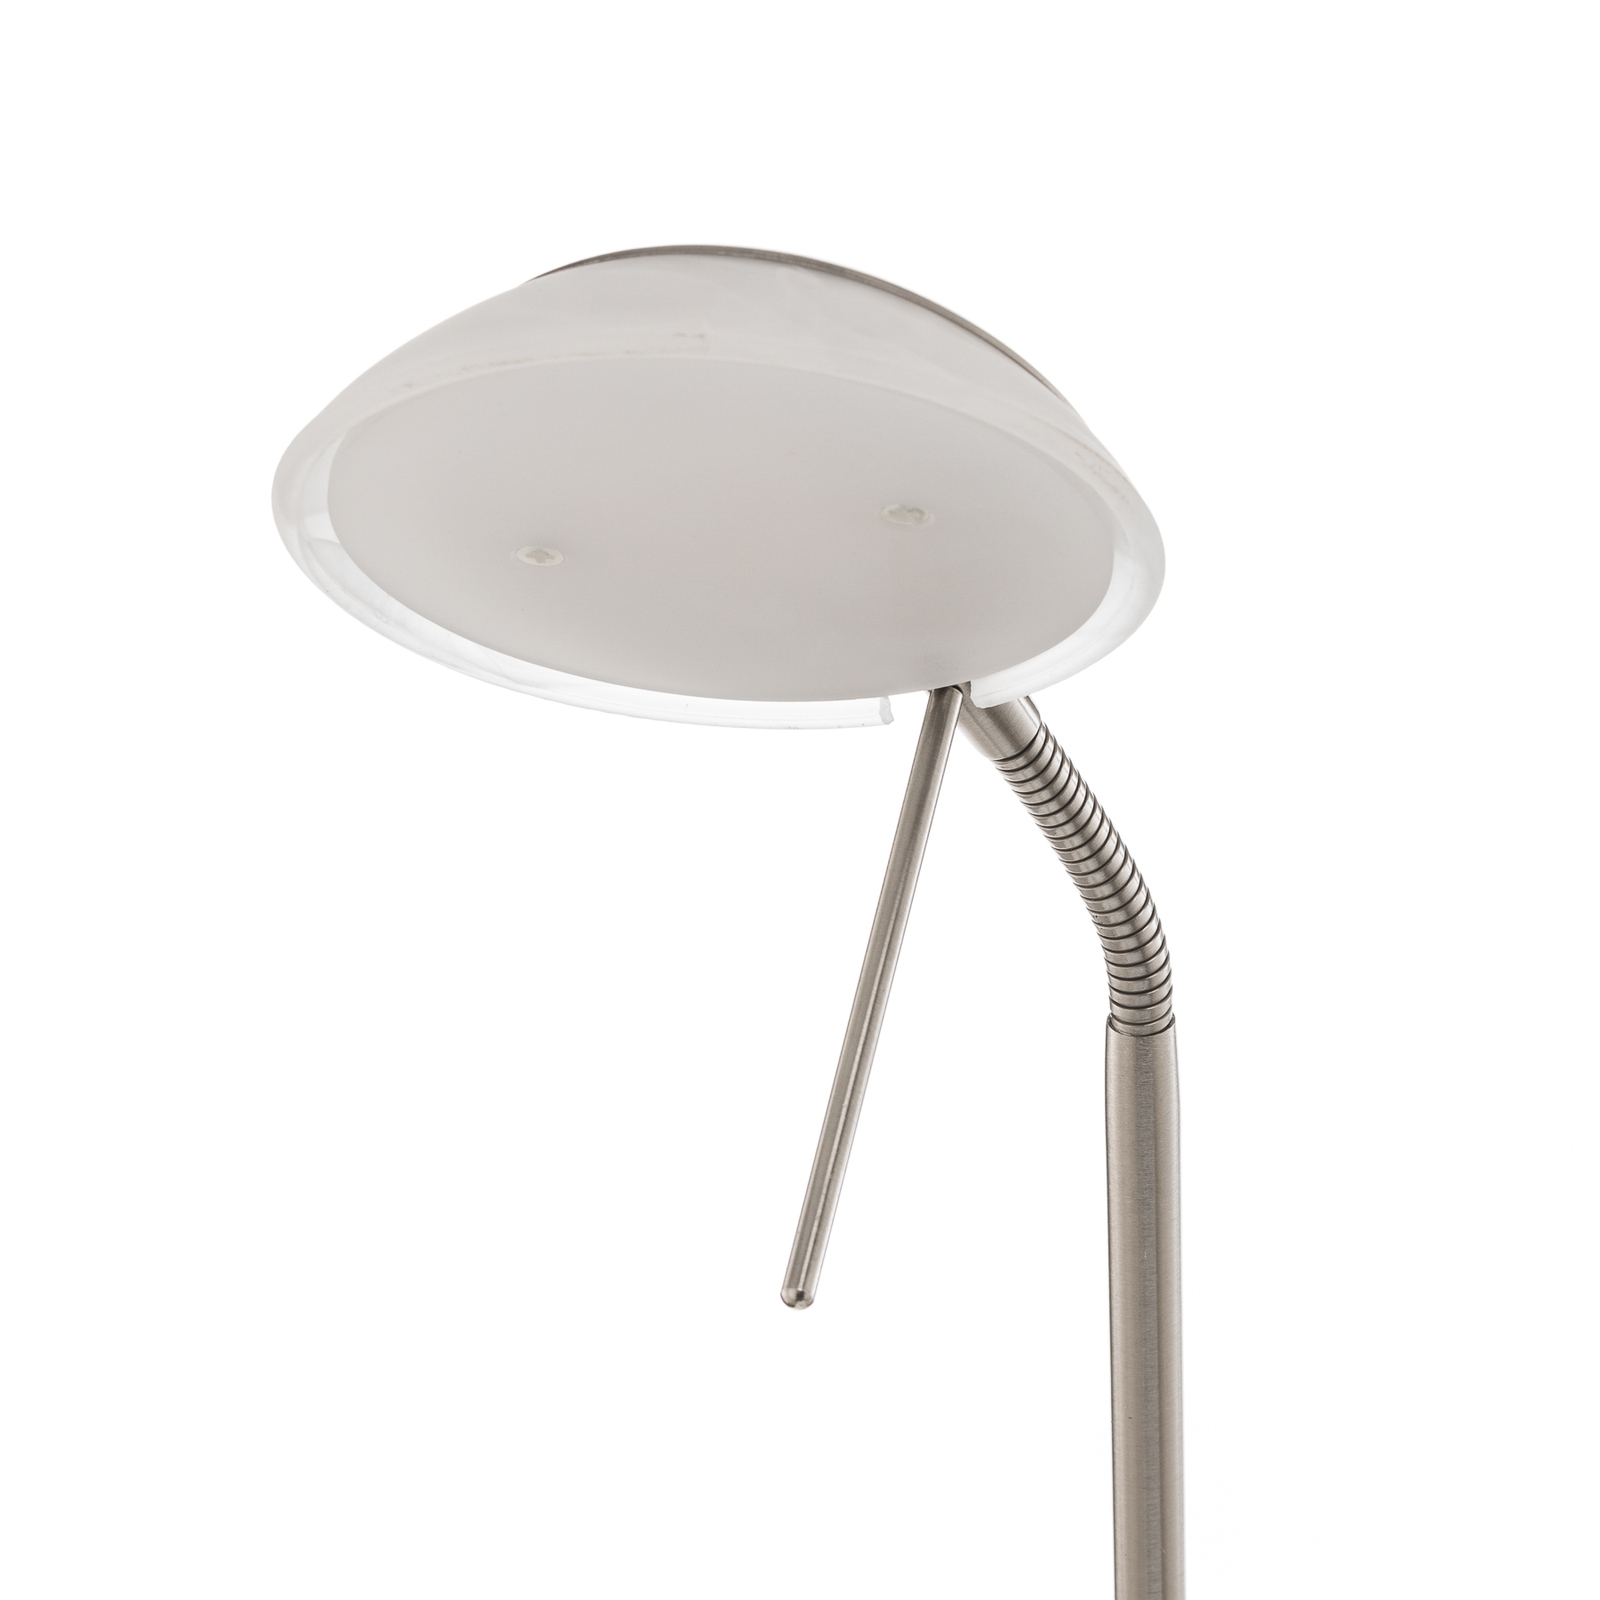 Lampadaire LED Pool TW, à 2 lampes, nickel